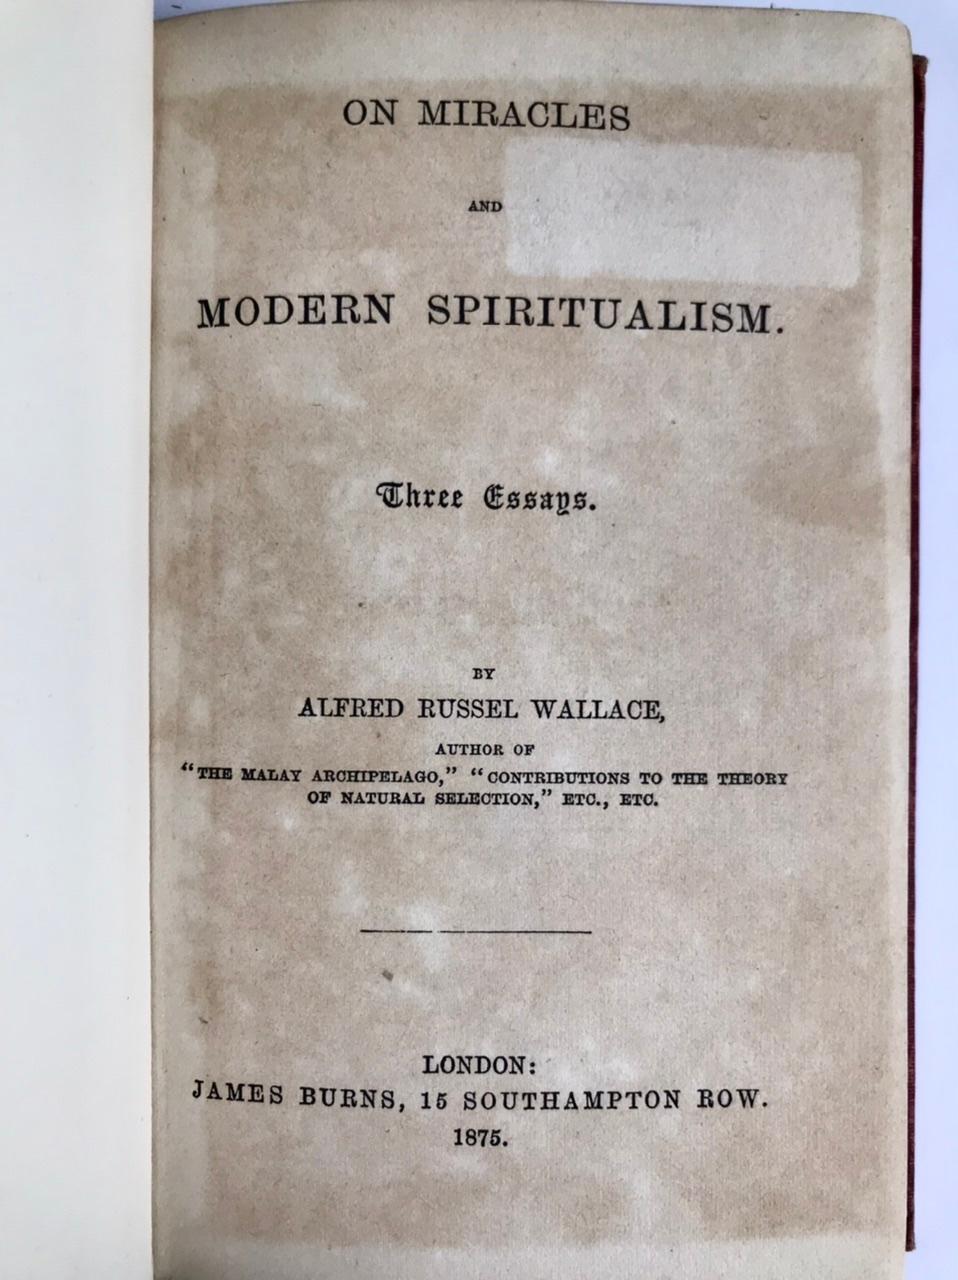 On Miracles And Modern Spiritualism by Alfred Russel Wallace